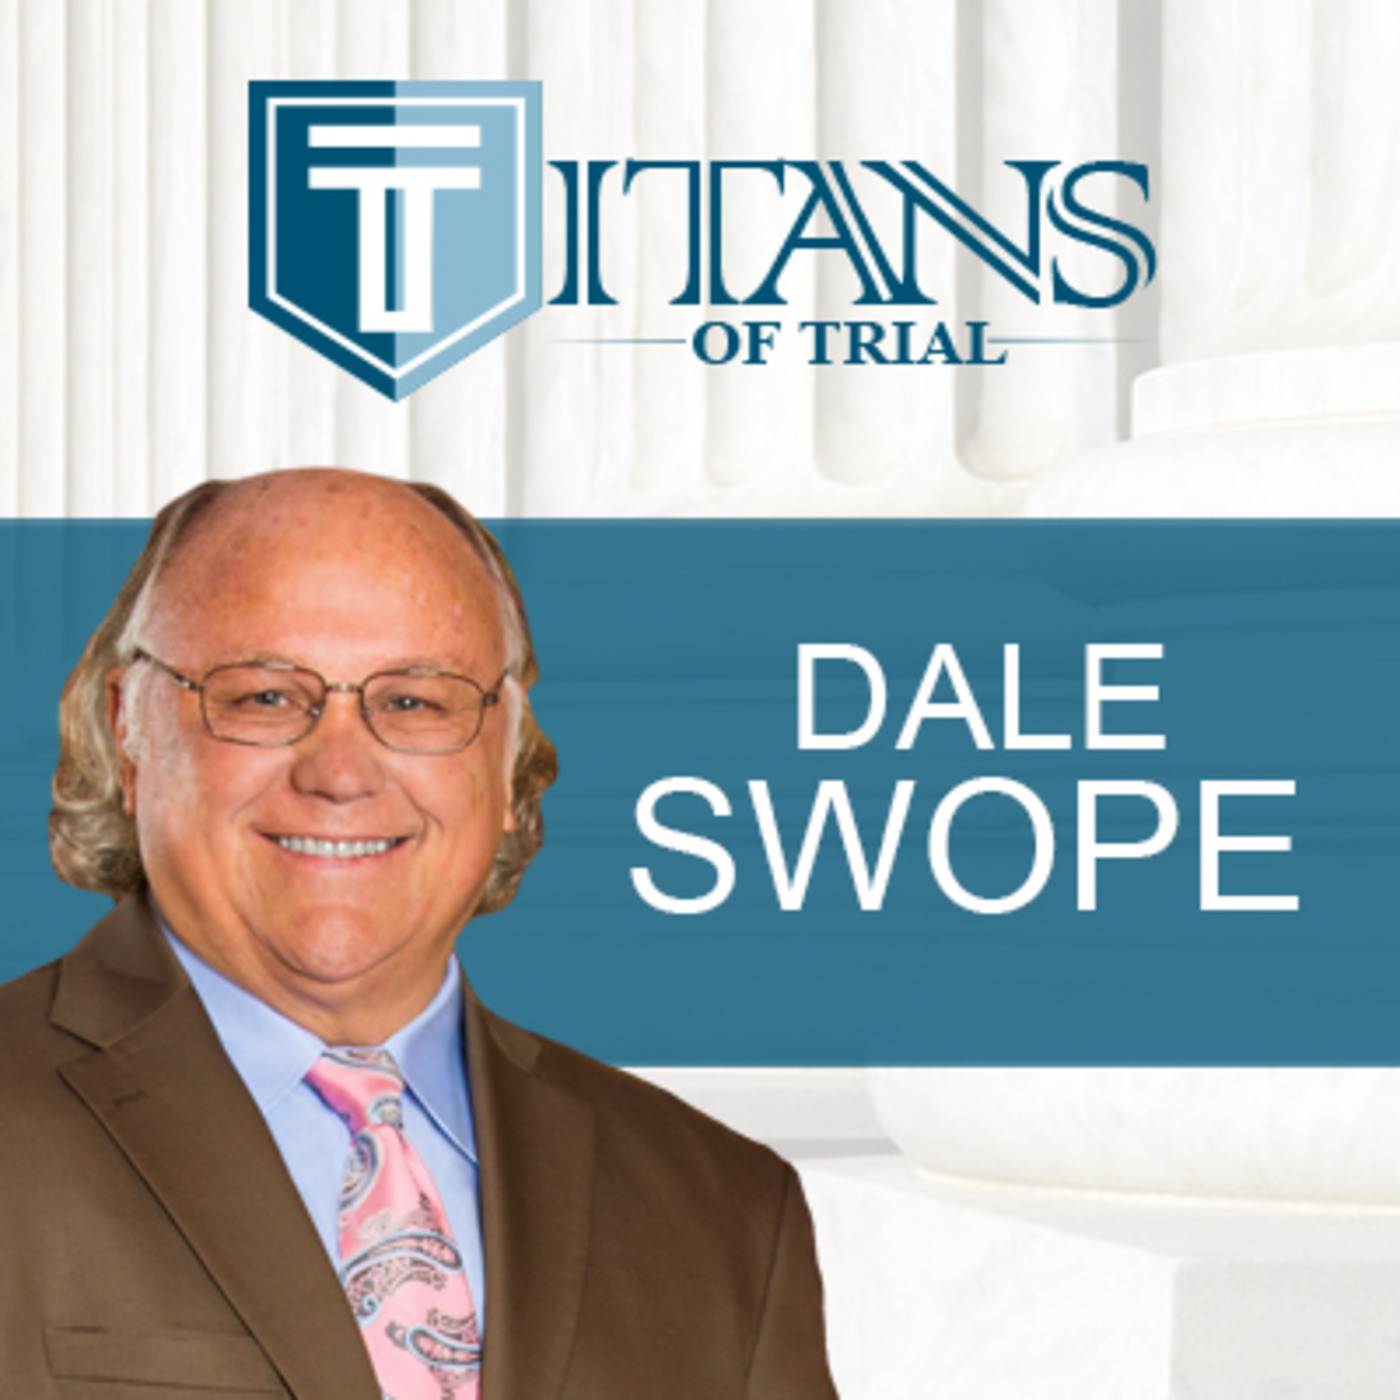 Titans of Trial – Dale Swope